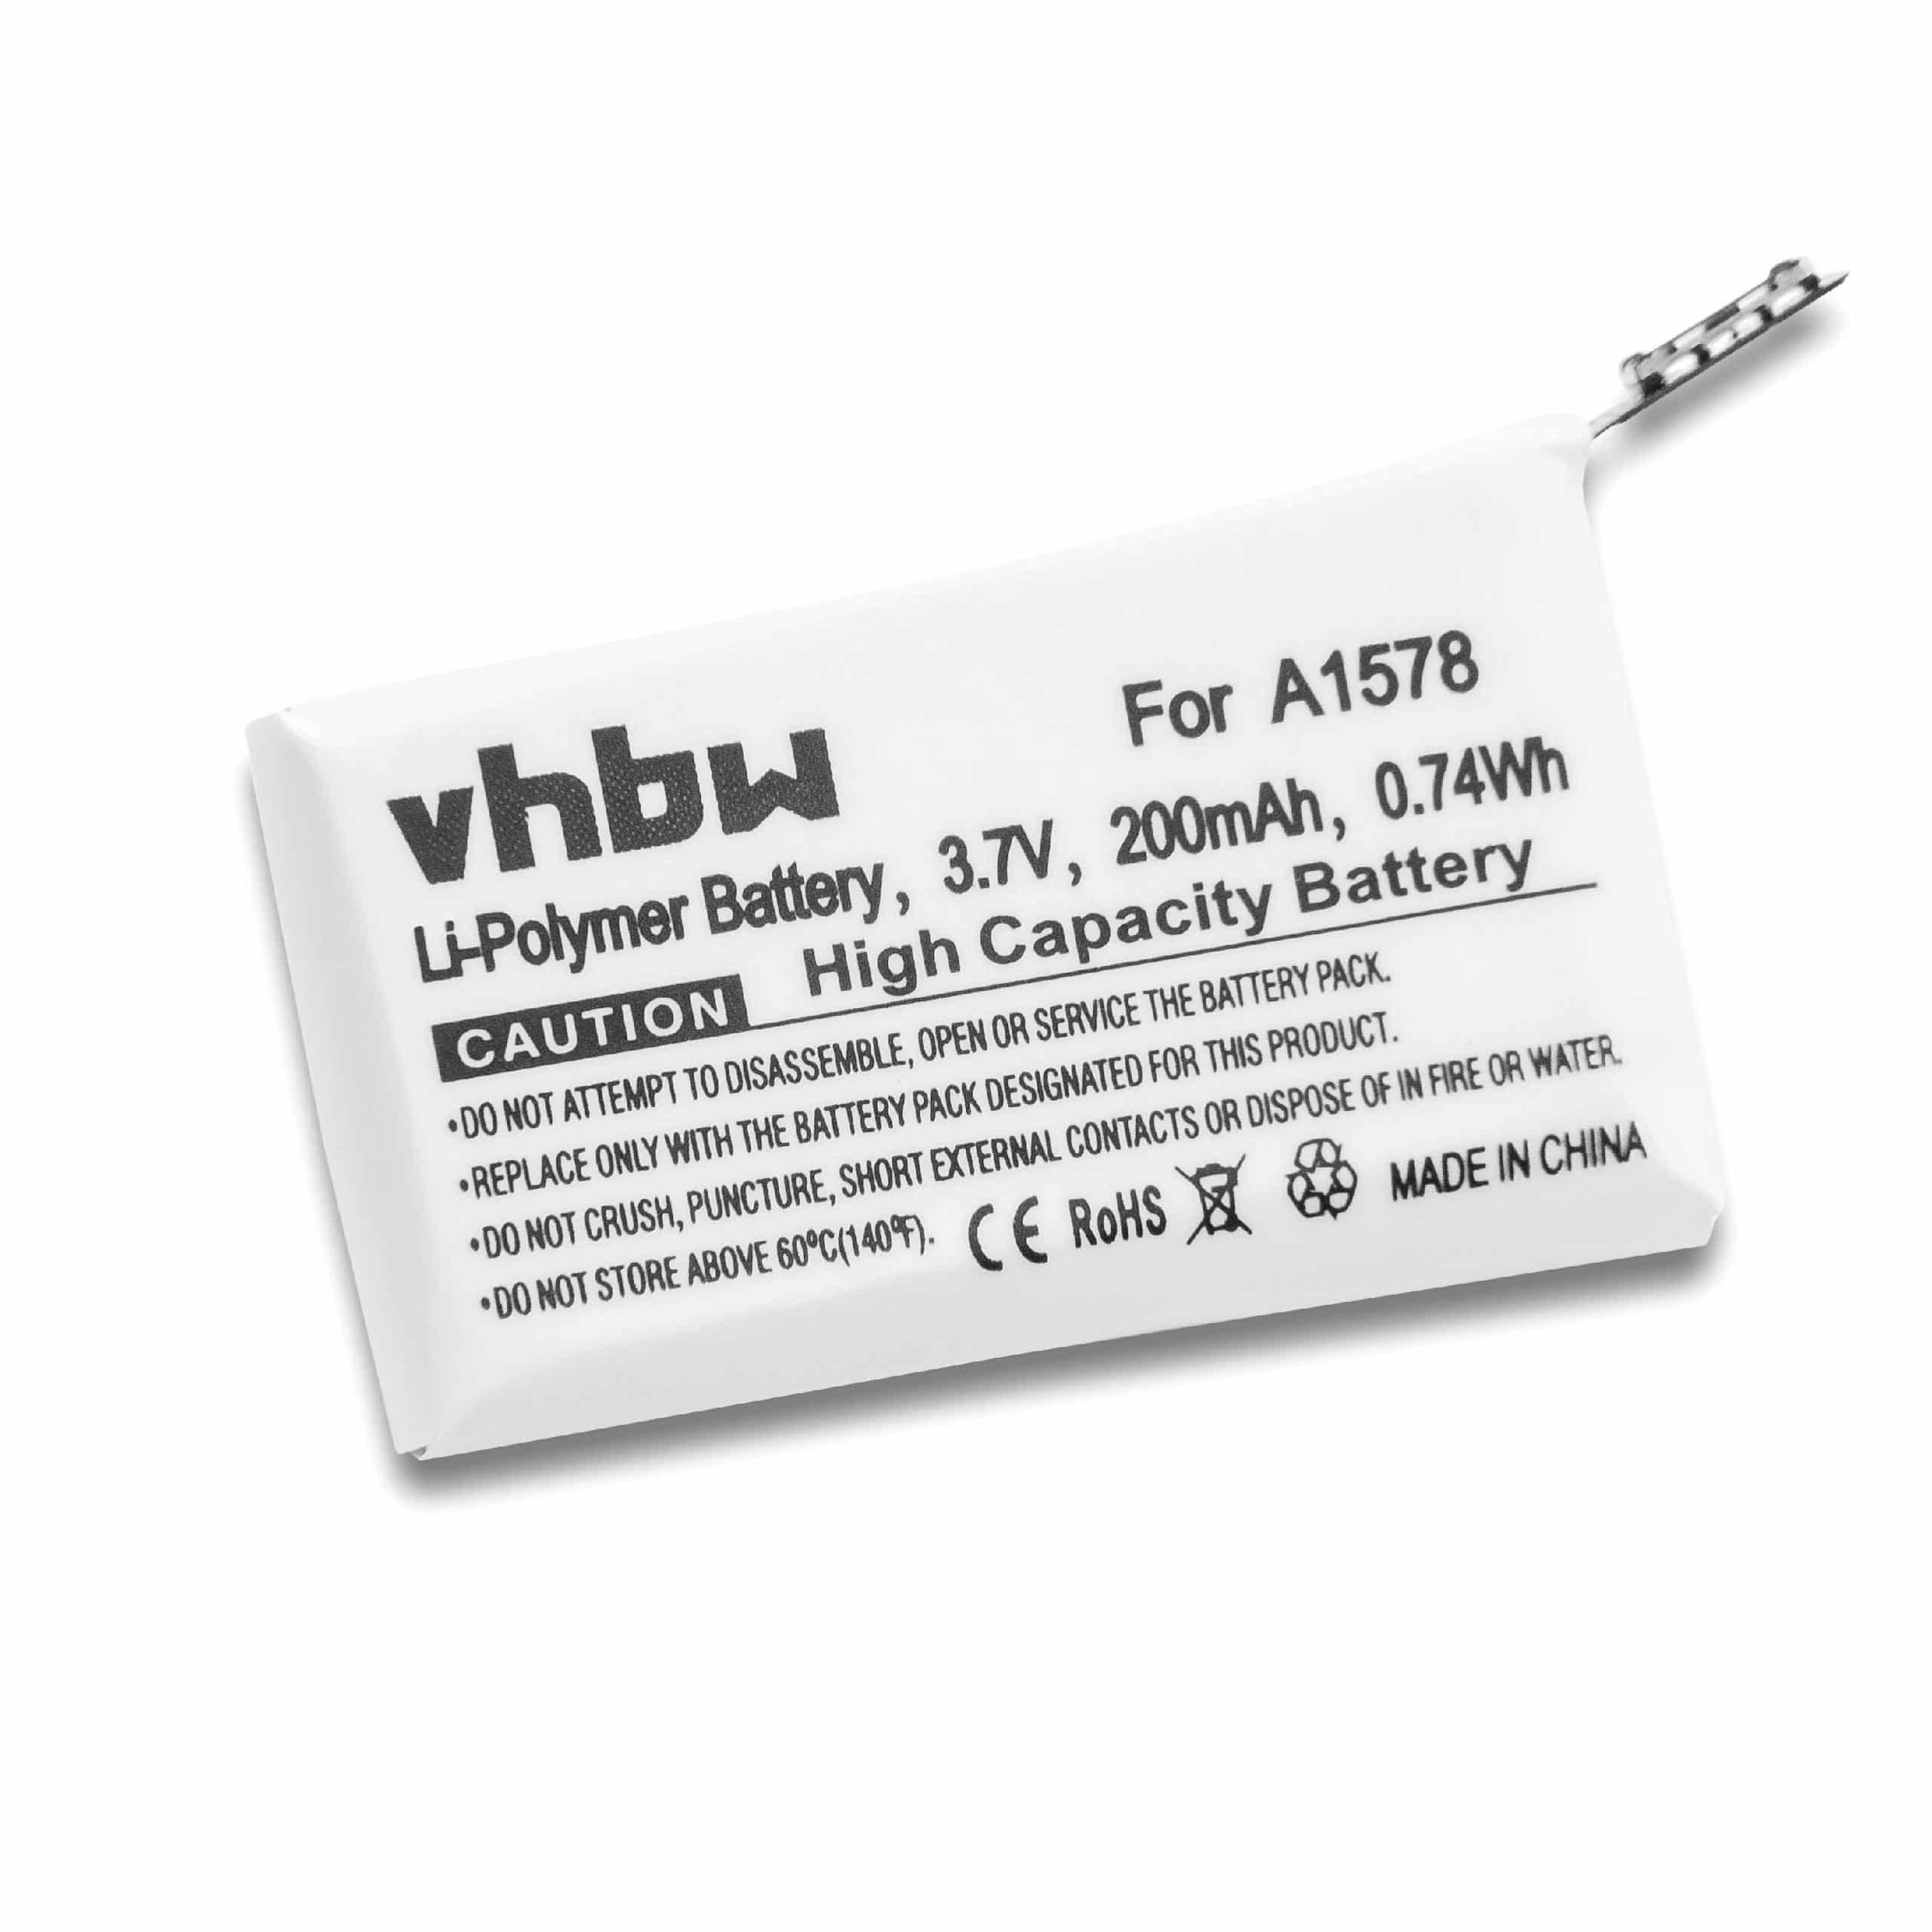 Smartwatch Battery Replacement for Apple A1578 - 200mAh 3.8V Li-polymer